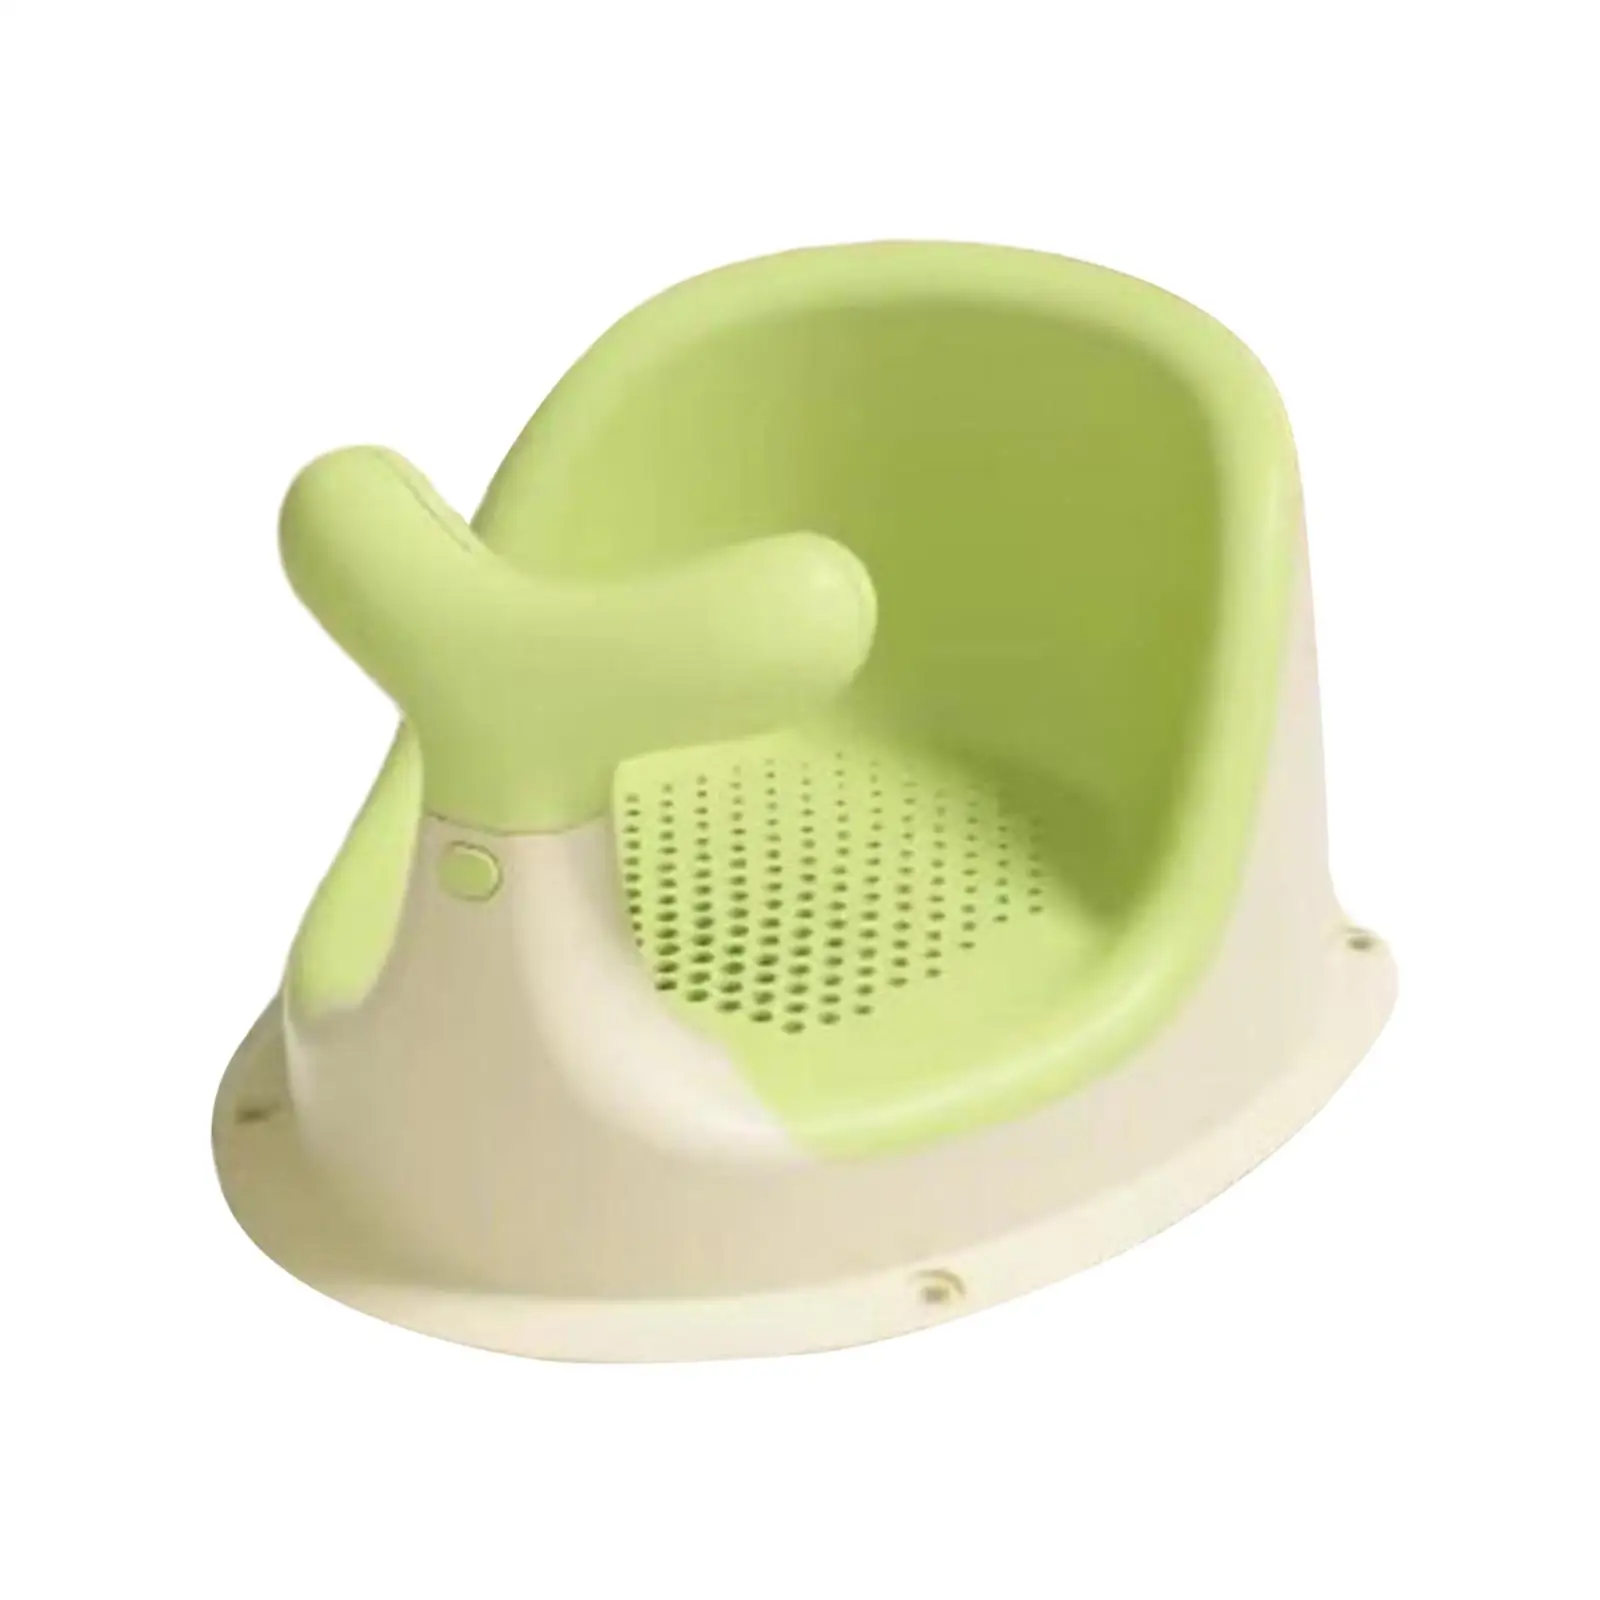 Baby Bath Seat Portable Stable Newborn Shower Seats Comfortable Toddlers Shower Seats for Boys Toddlers Baby Infants Girls